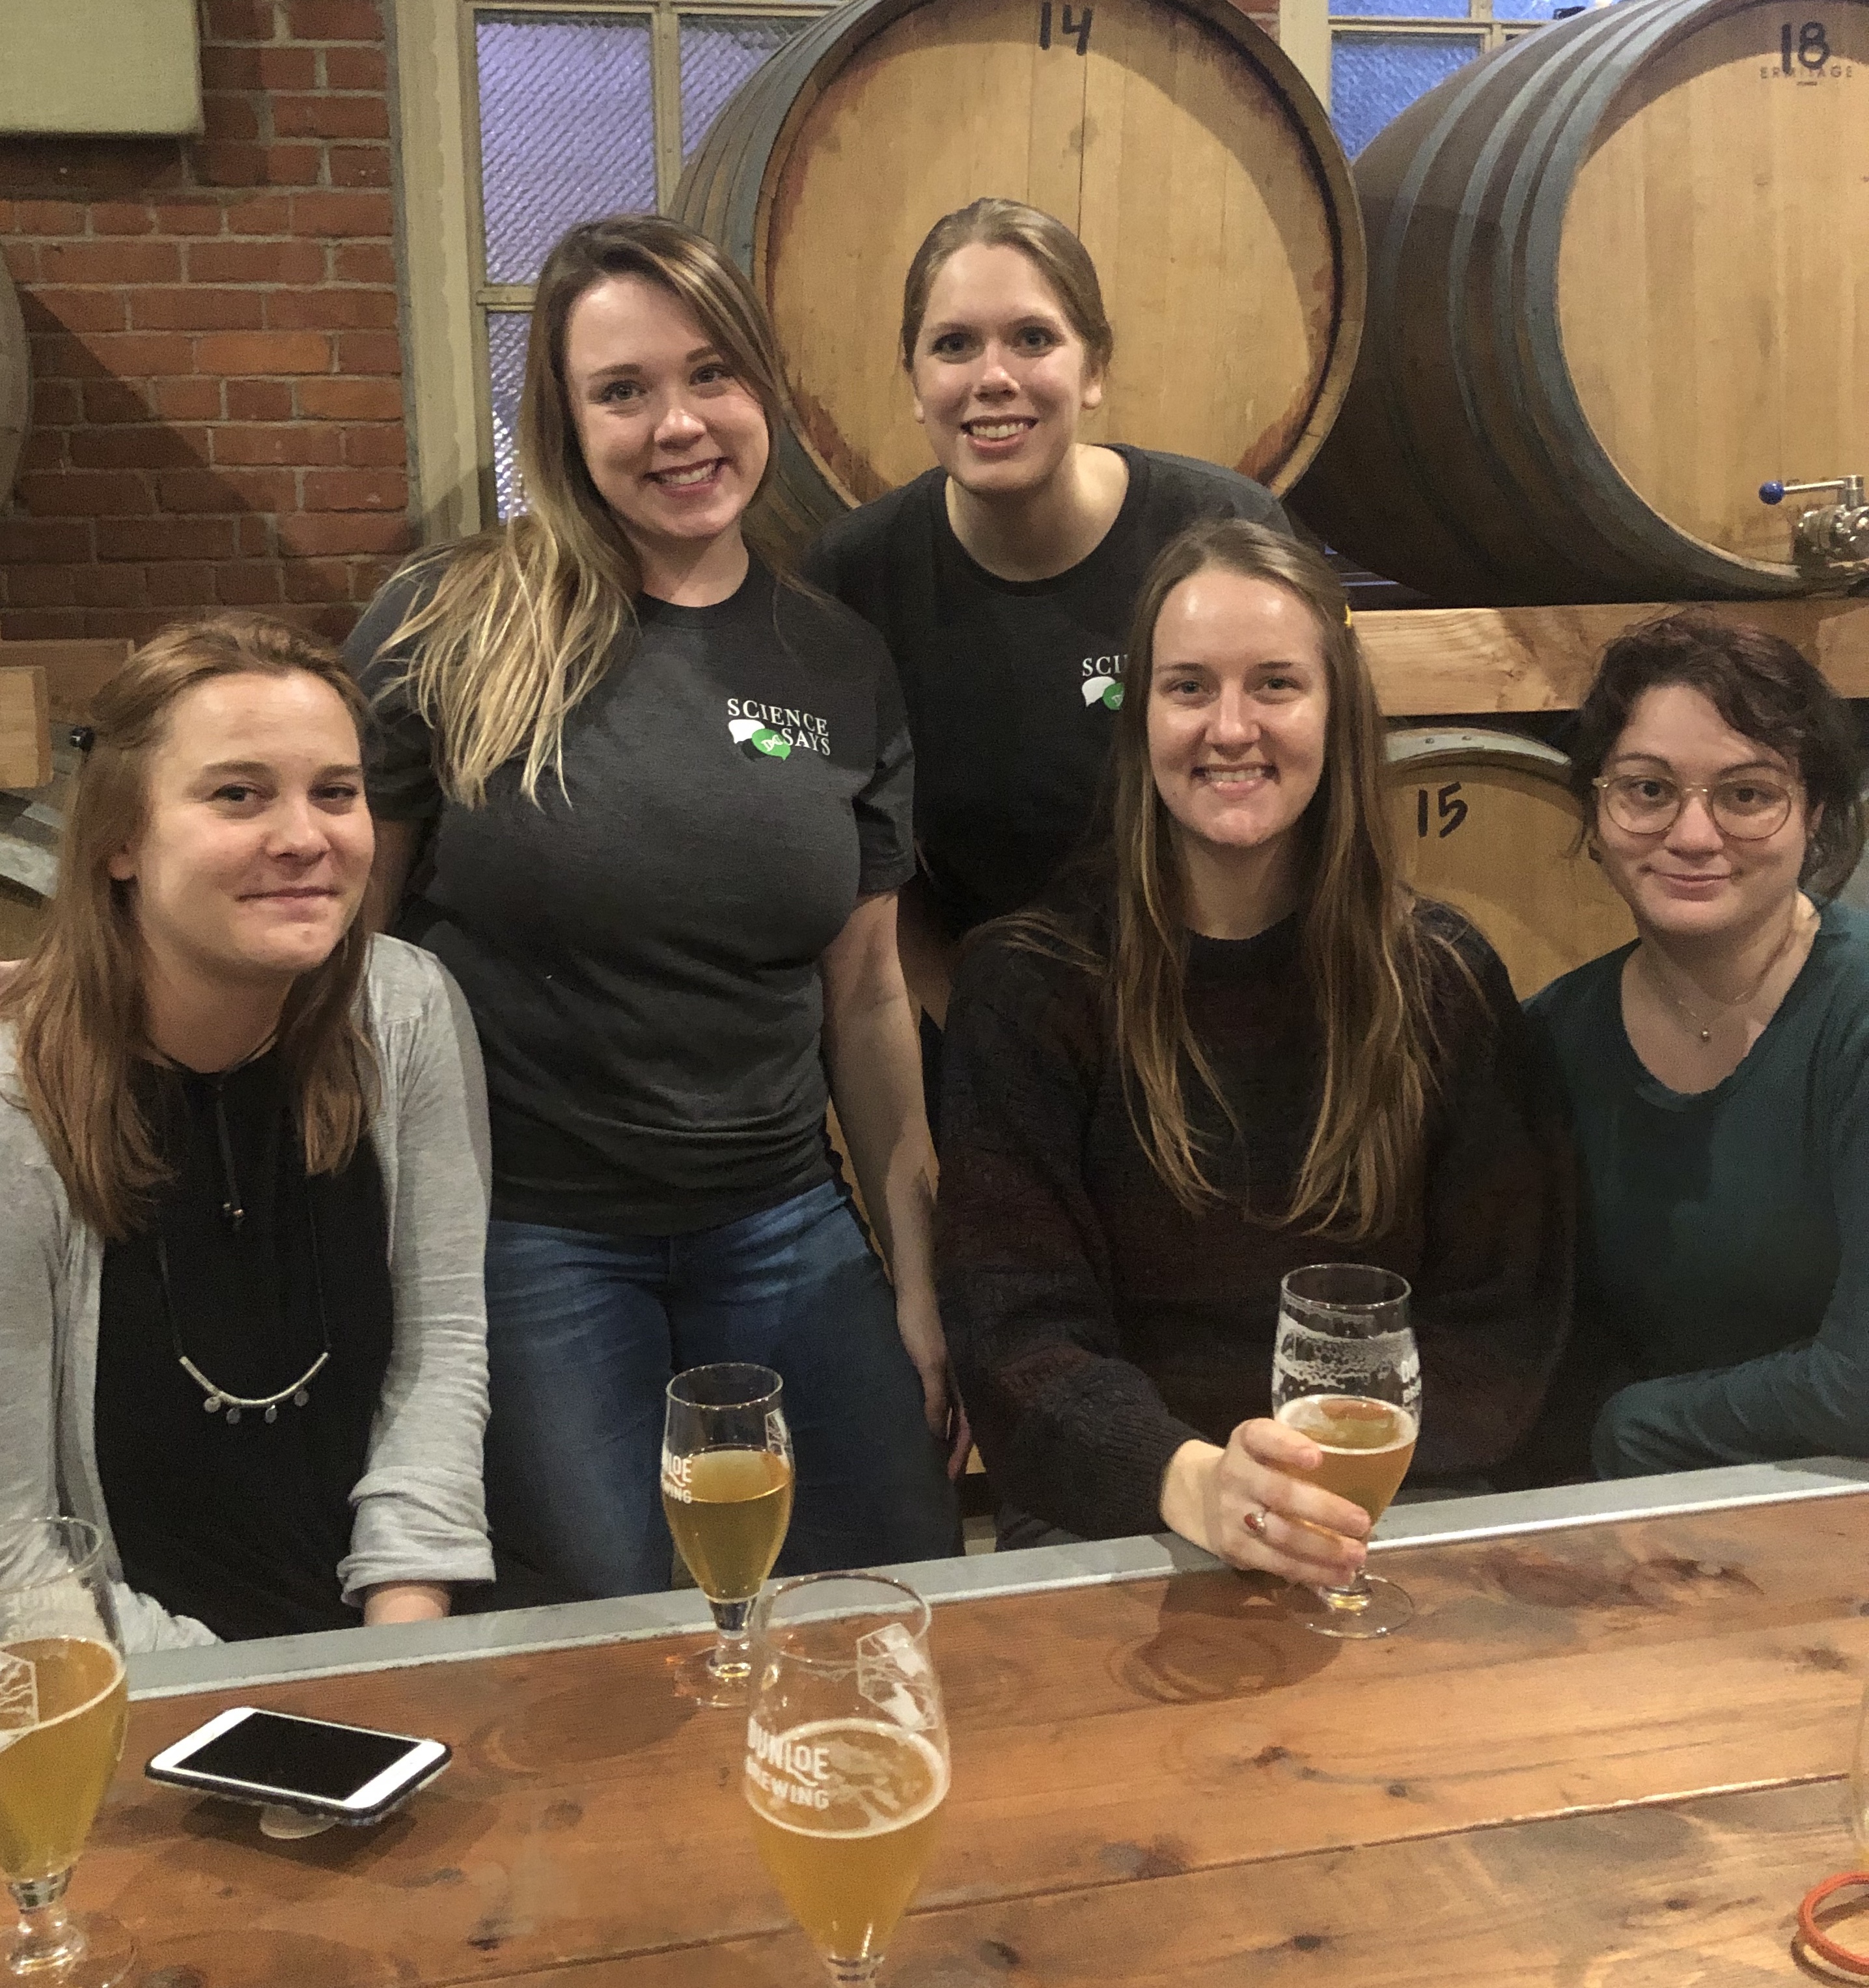 Attendees at fundraiser for Science Says at Dunloe Brewing